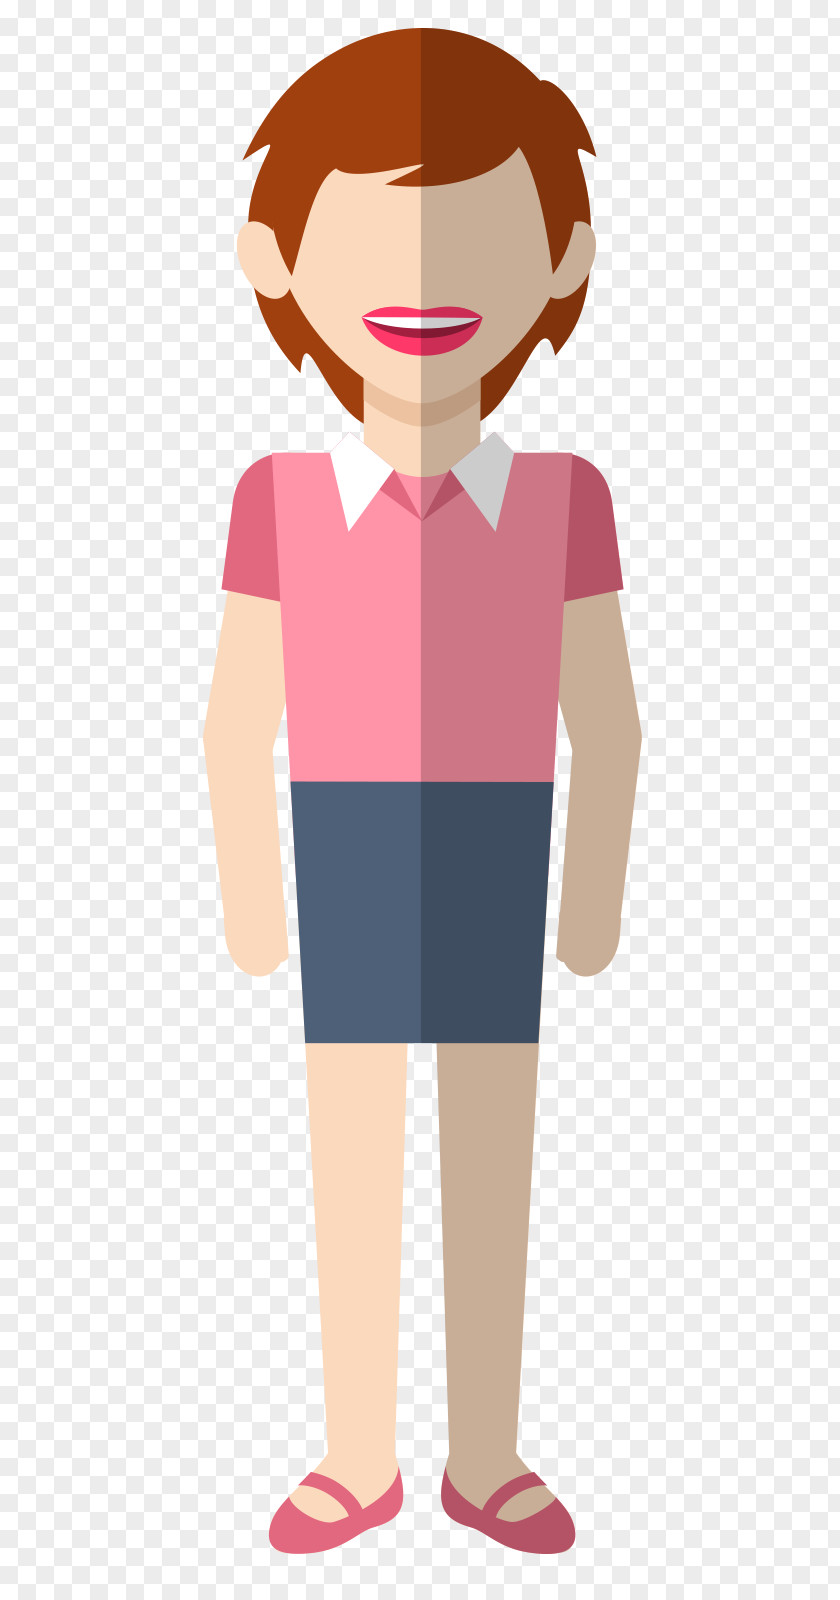 Short Haired Woman Avatar PNG